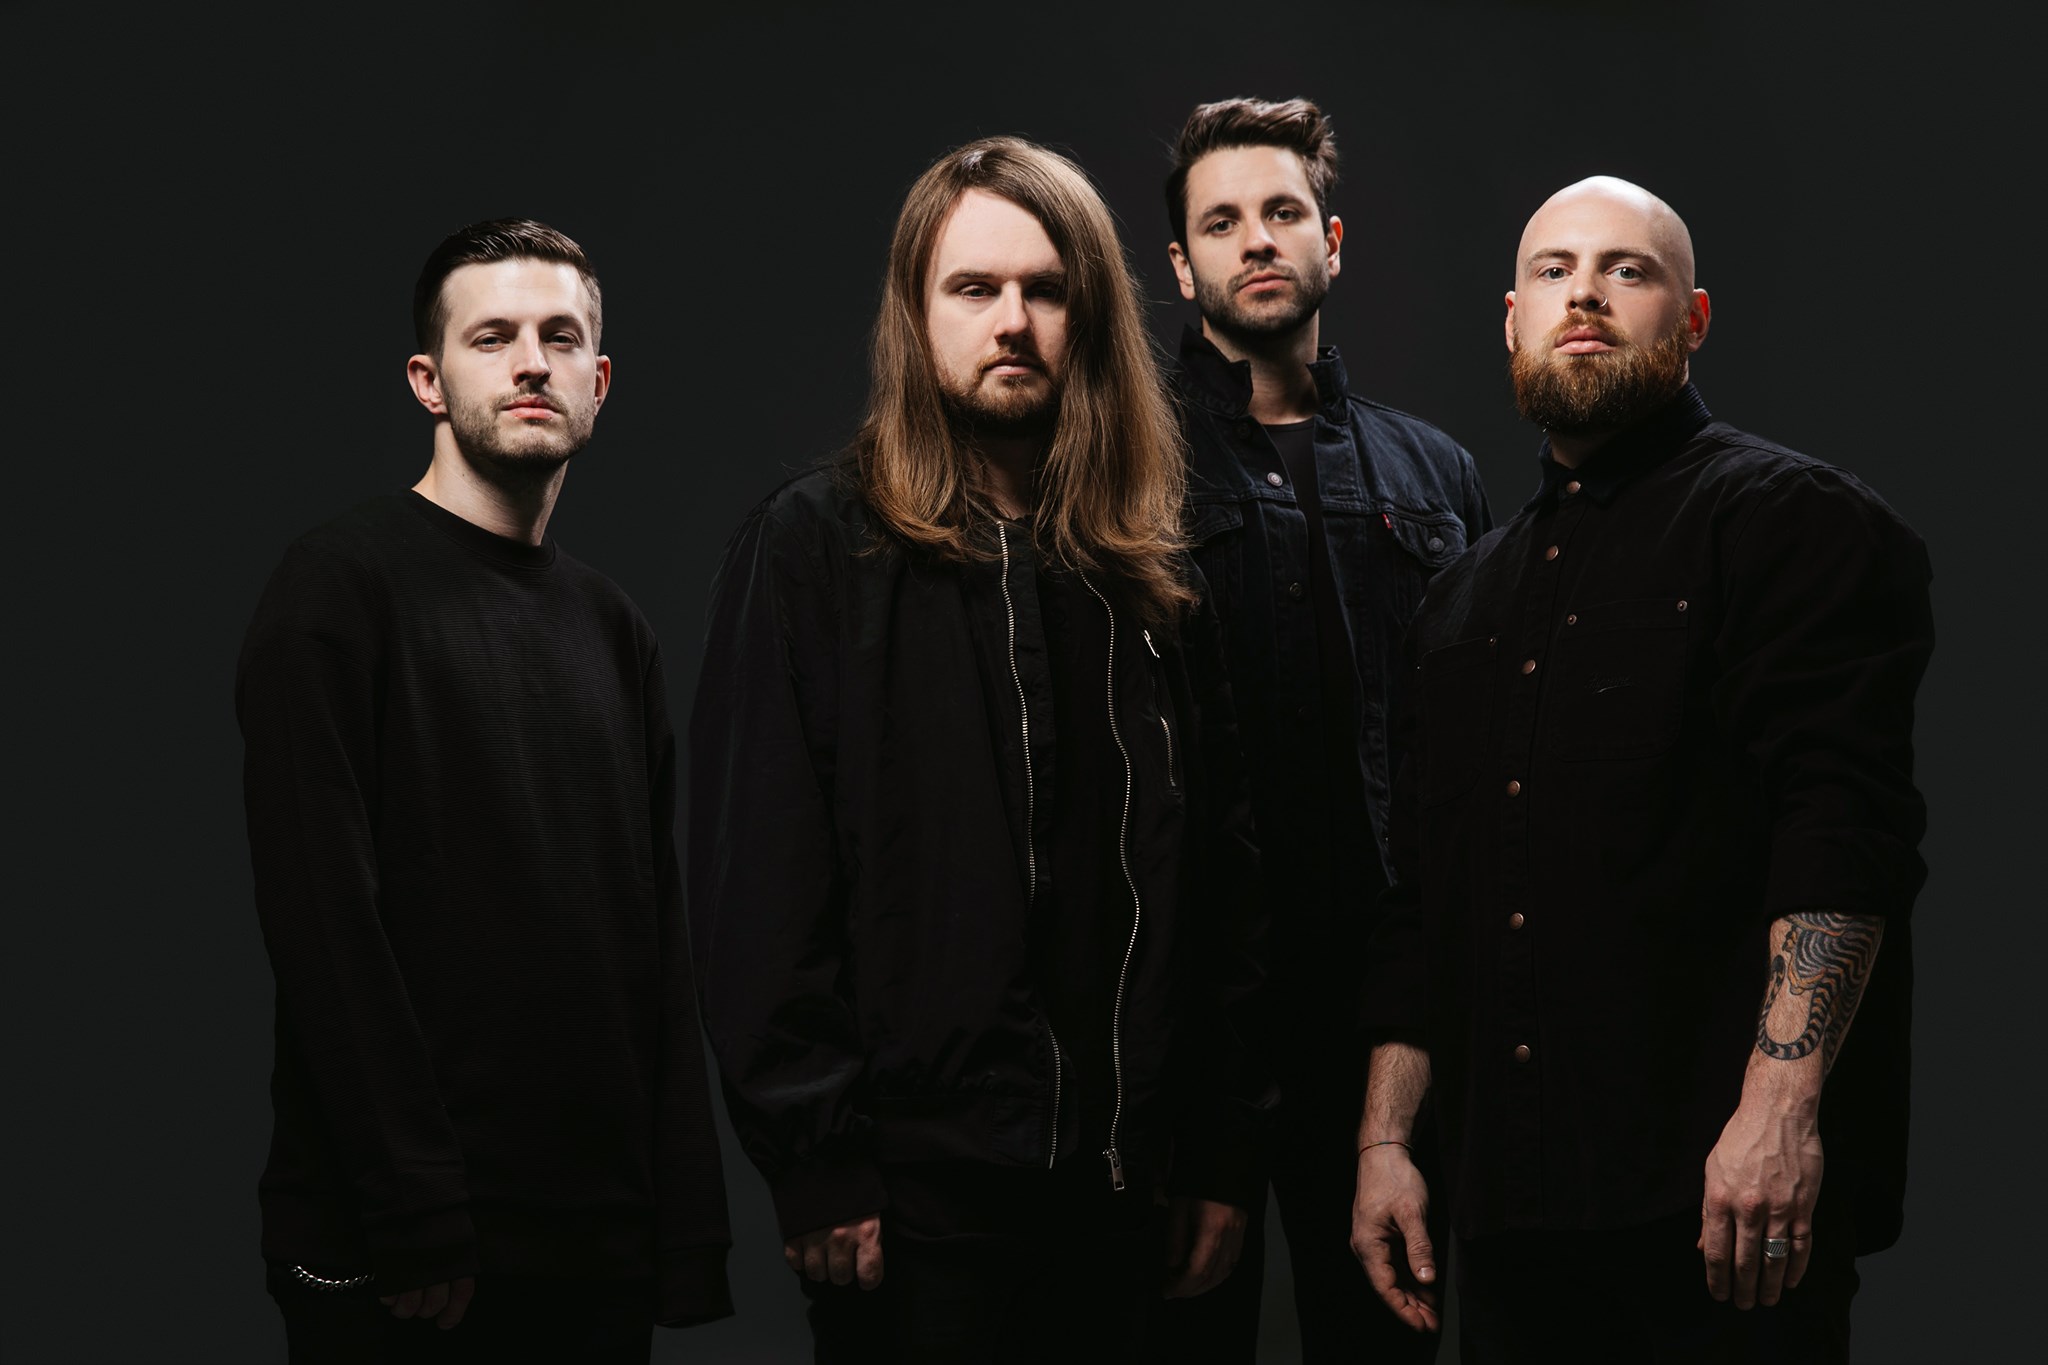 FIT FOR A KING ANNOUNCE NEW ALBUM ‘THE PATH’